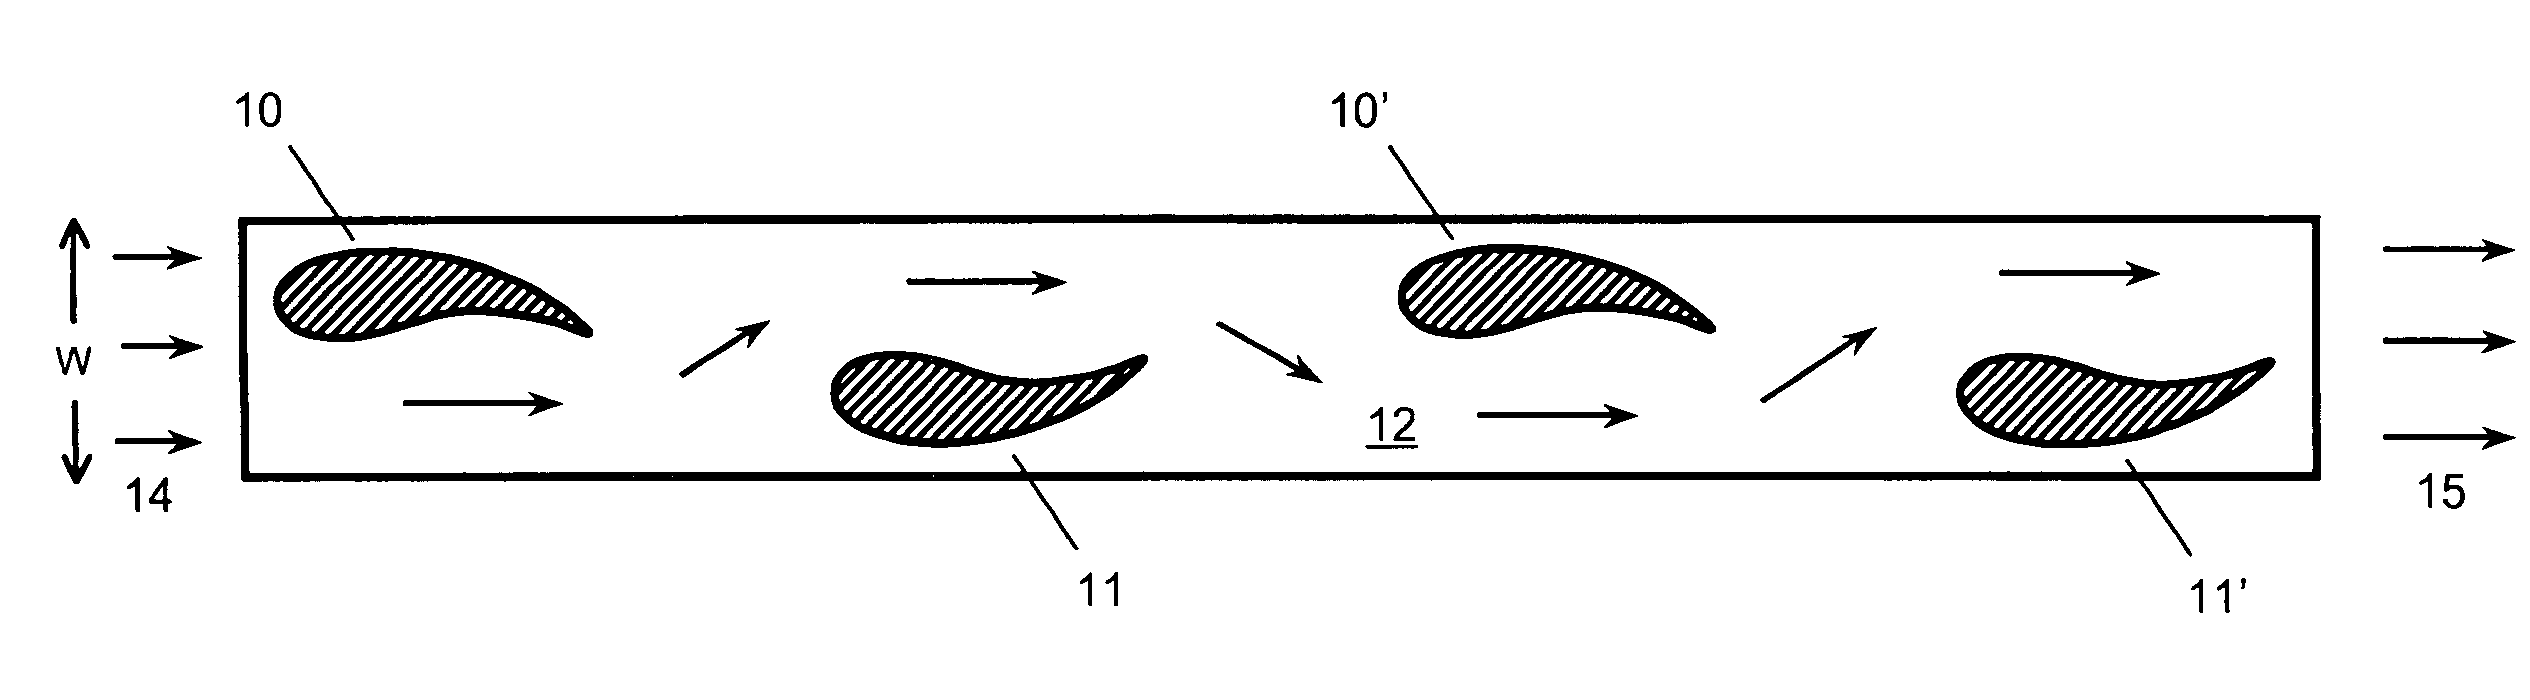 Airfoil-shaped micro-mixers for reducing fouling on membrane surfaces